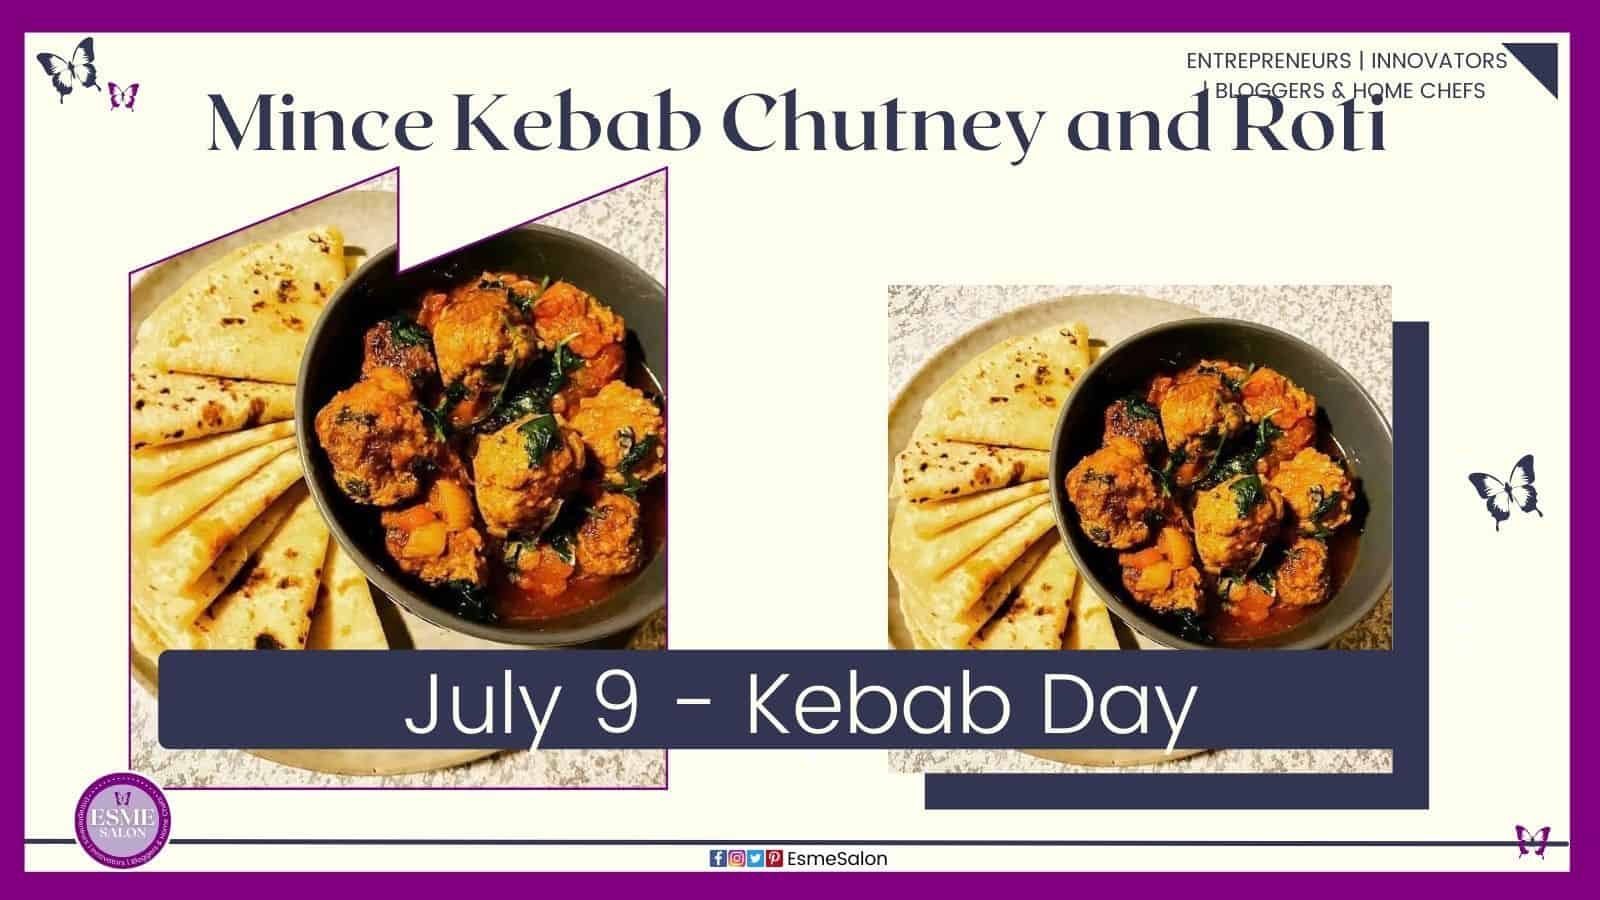 an image of Mince Kebab Chutney in a black bowl and Roti on the side